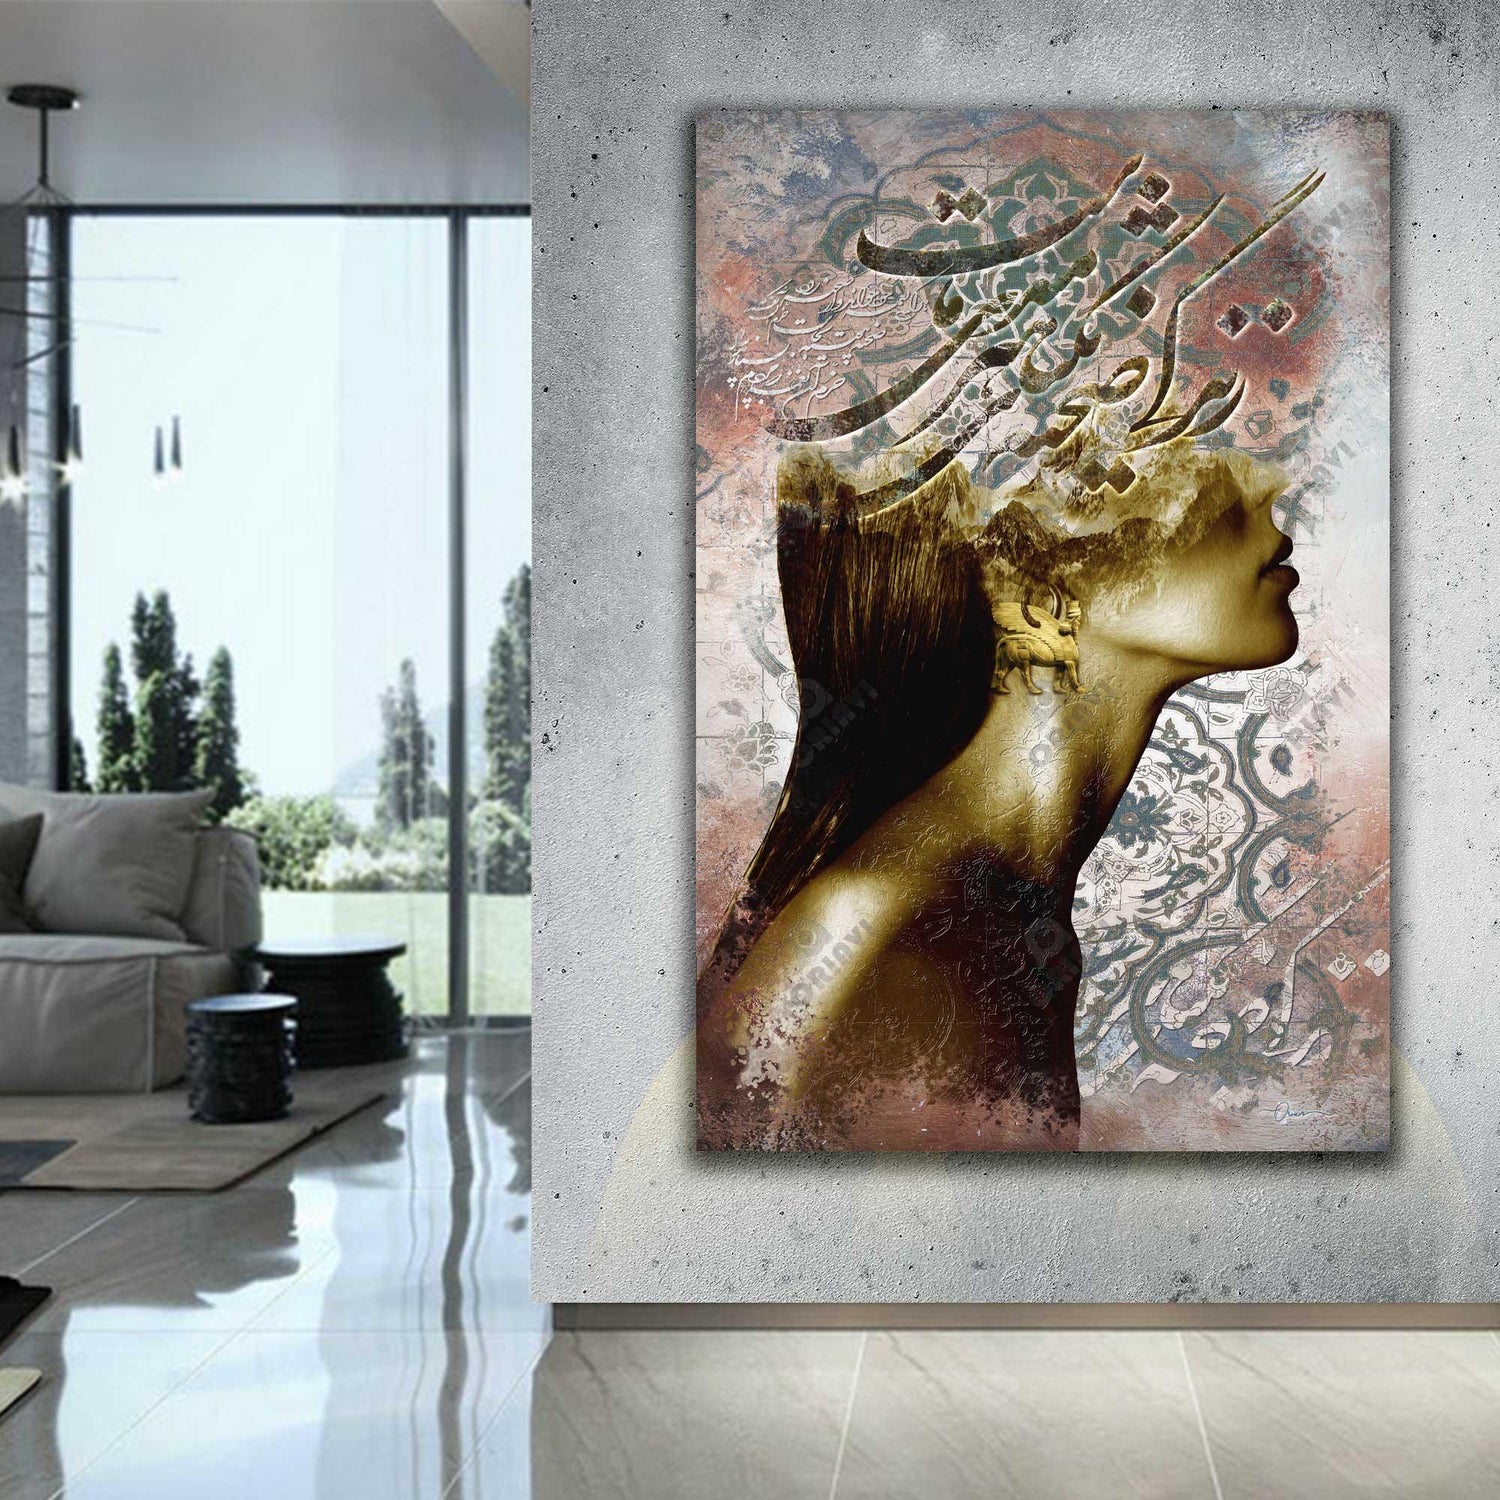 Life is the only stage for our artistry | Modern Persian Wall Art - ORIAVI Persian Art, persian artwork for sale, persian calligraphy, persian calligraphy wall art, persian mix media wall art, persian painting, persian wall art